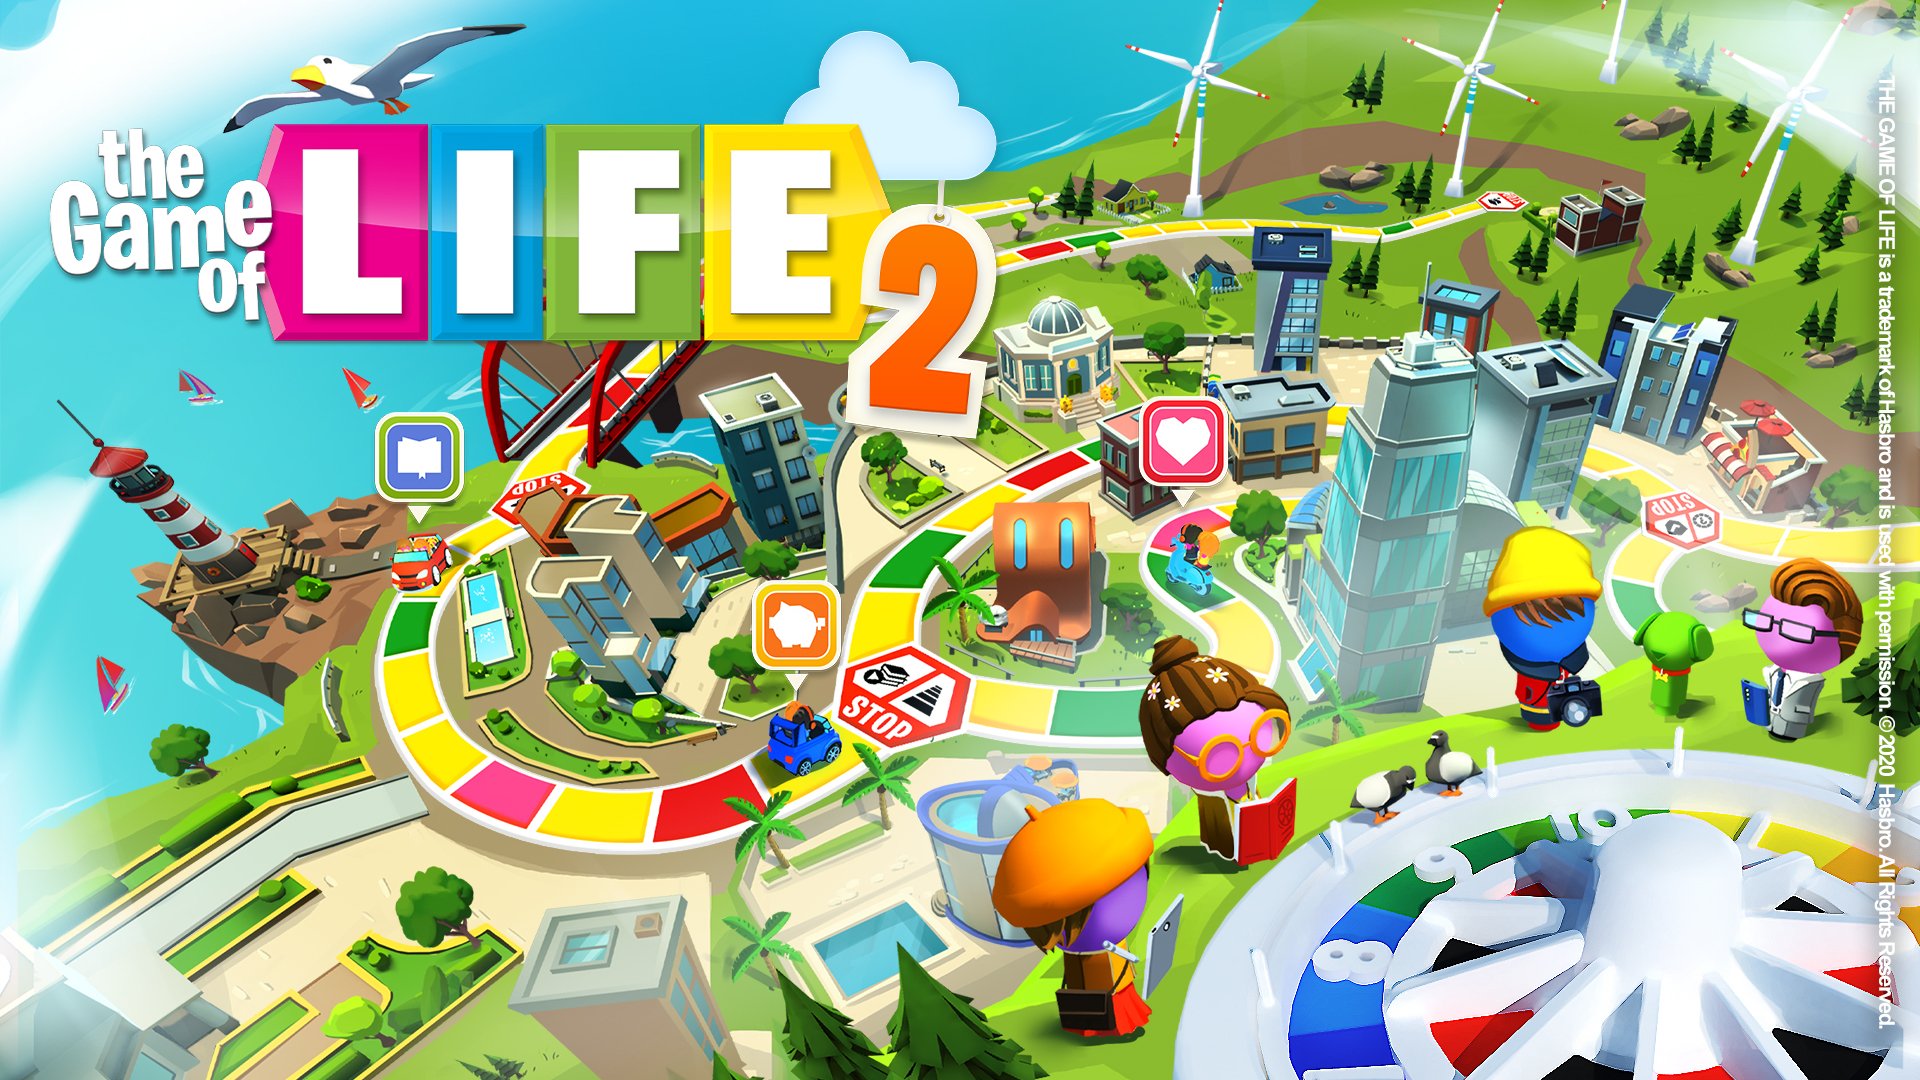 THE GAME OF LIFE 2 PC Latest Version Free Download